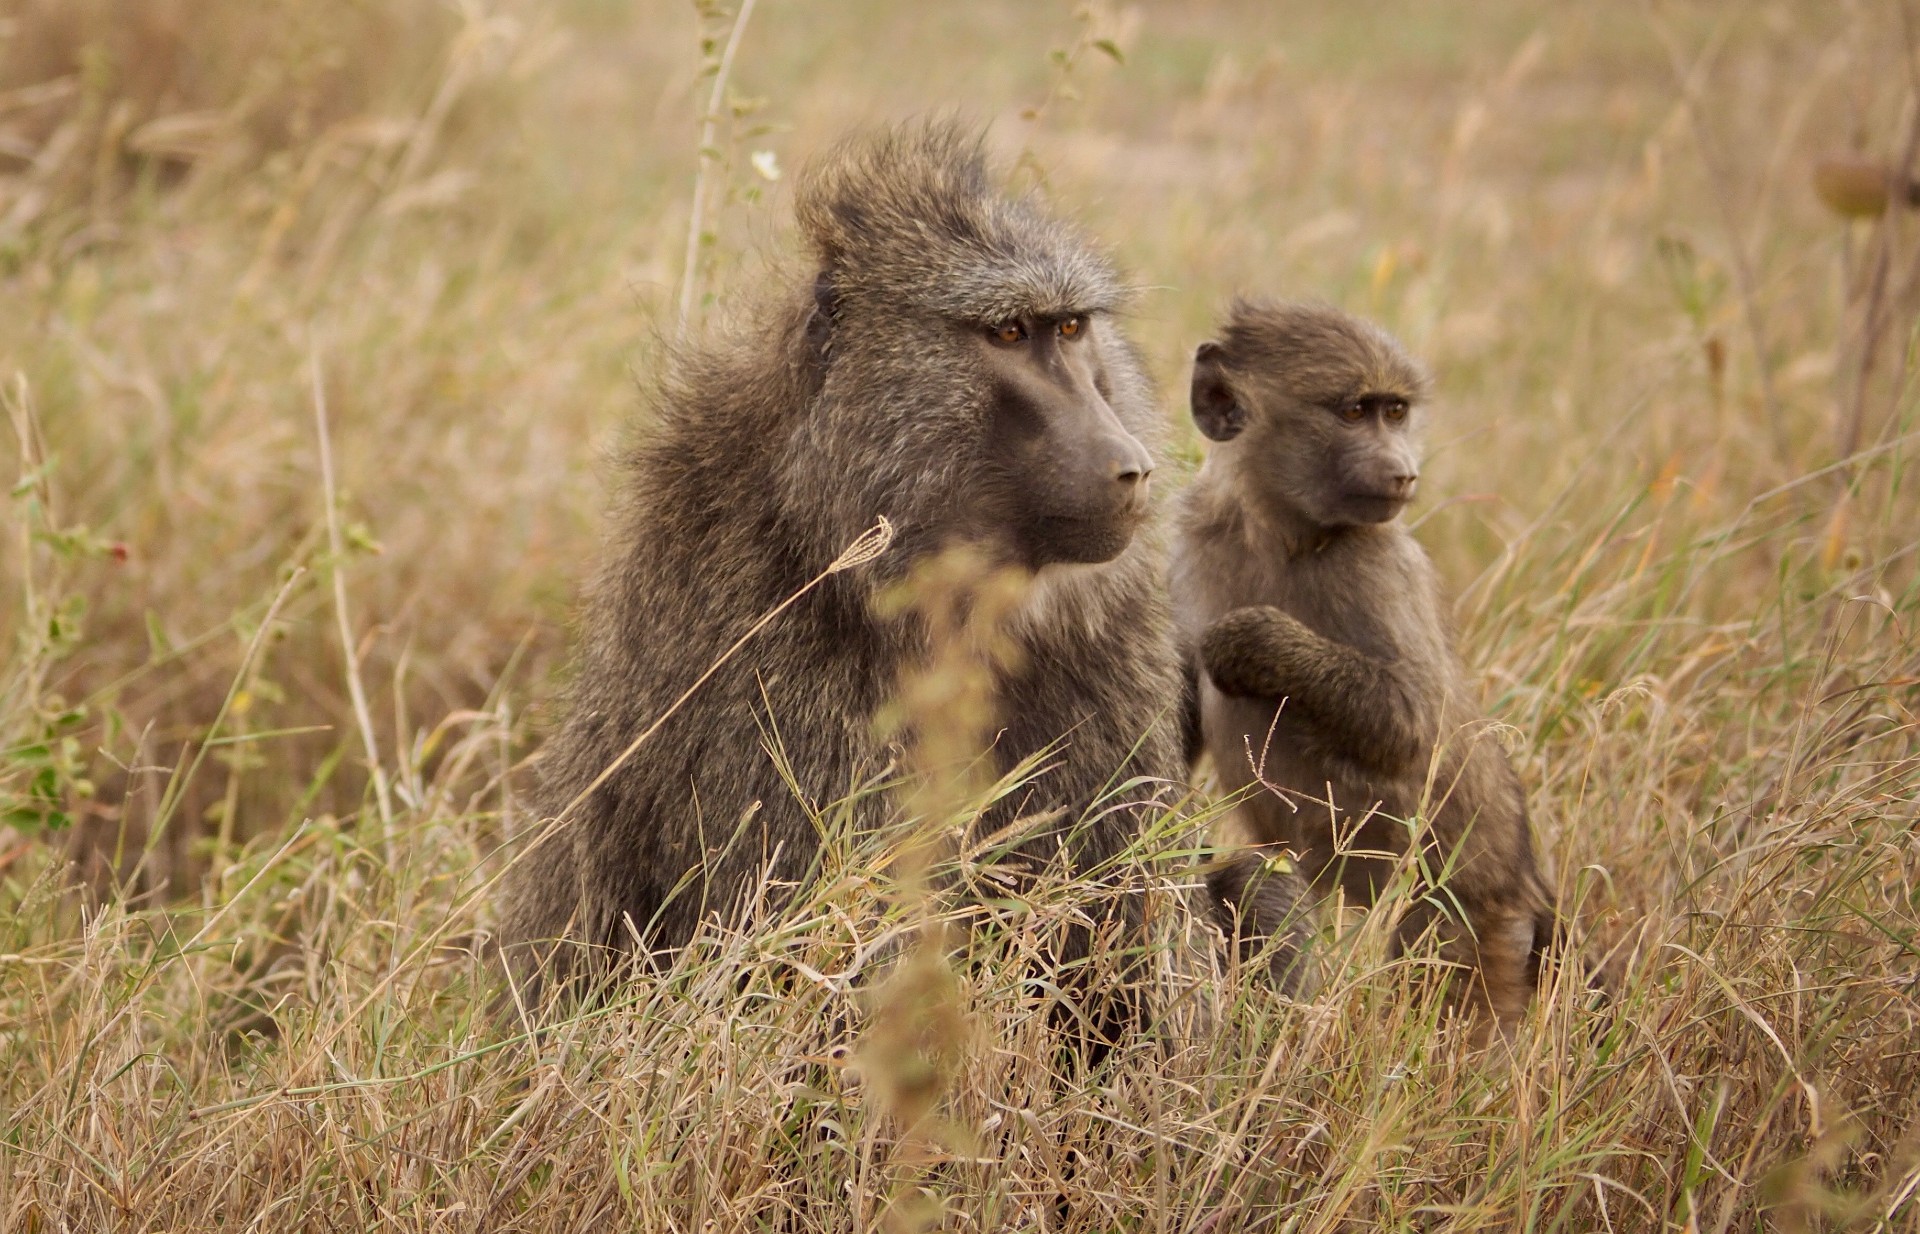 A mother and baby baboon sitting in long grass